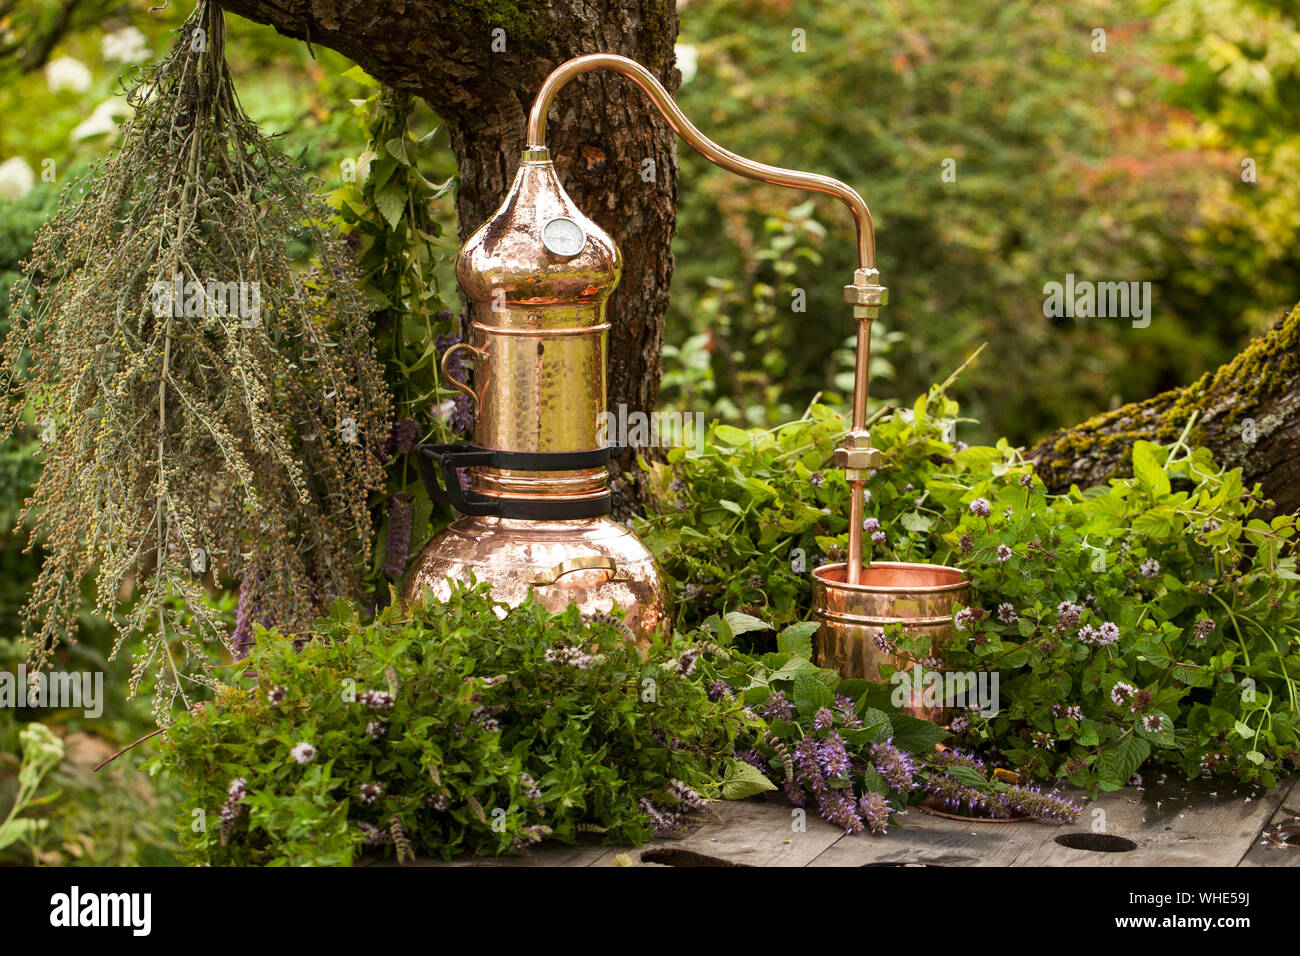 Alembic is a distilling apparatus of Arabic origin which may be used to distill essential oils and a variety of alcoholic beverages. Stock Photo